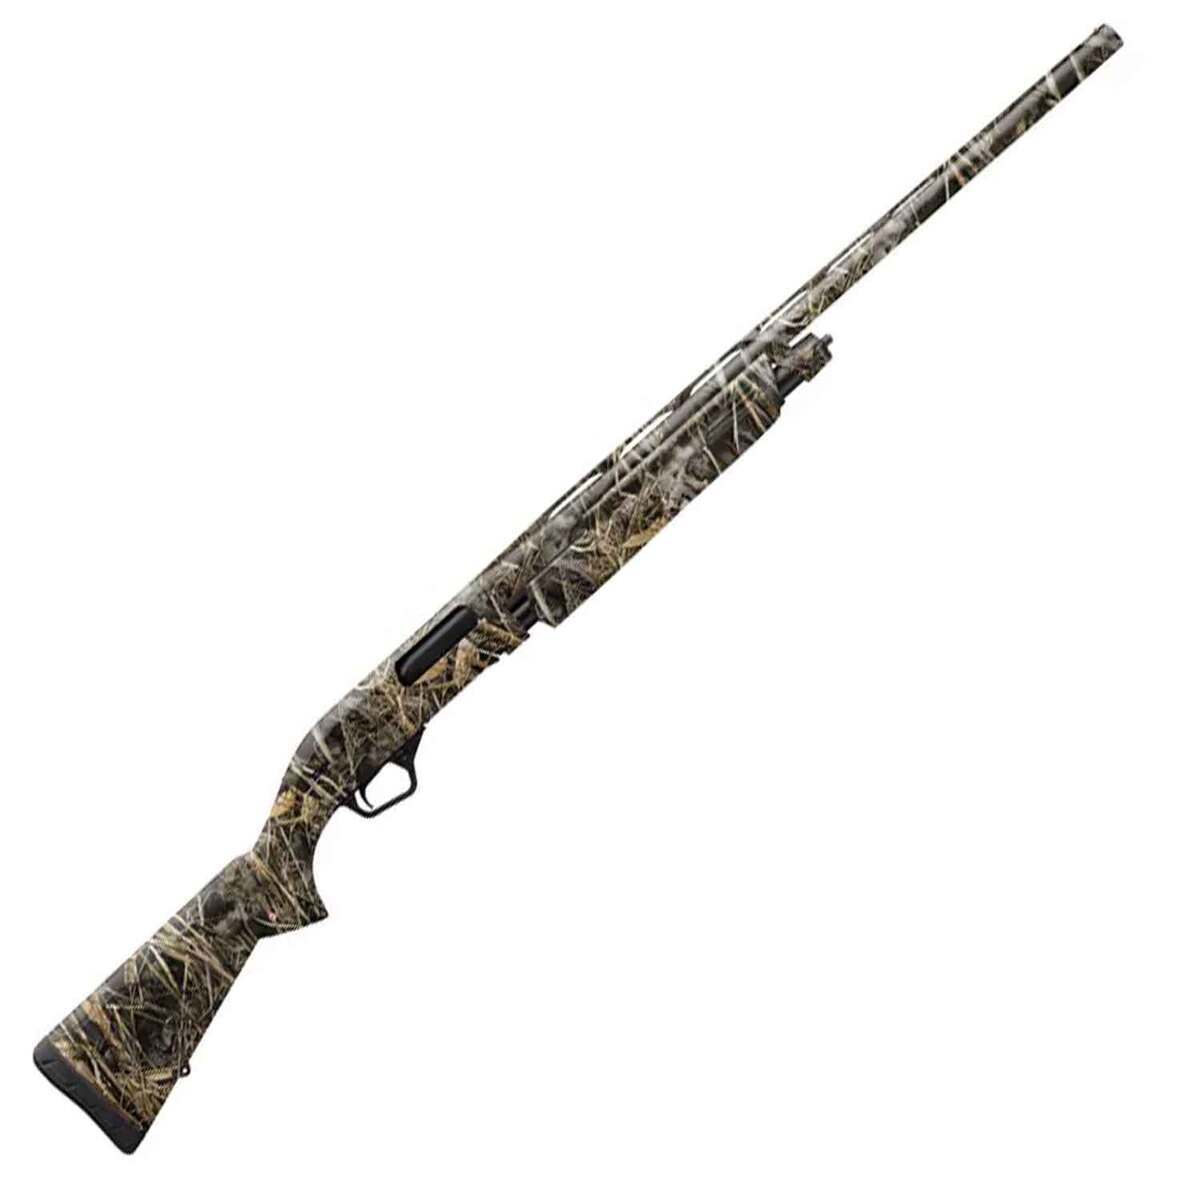 Winchester SXP Waterfowl Realtree Max-7 12 Gauge 3in Pump Action